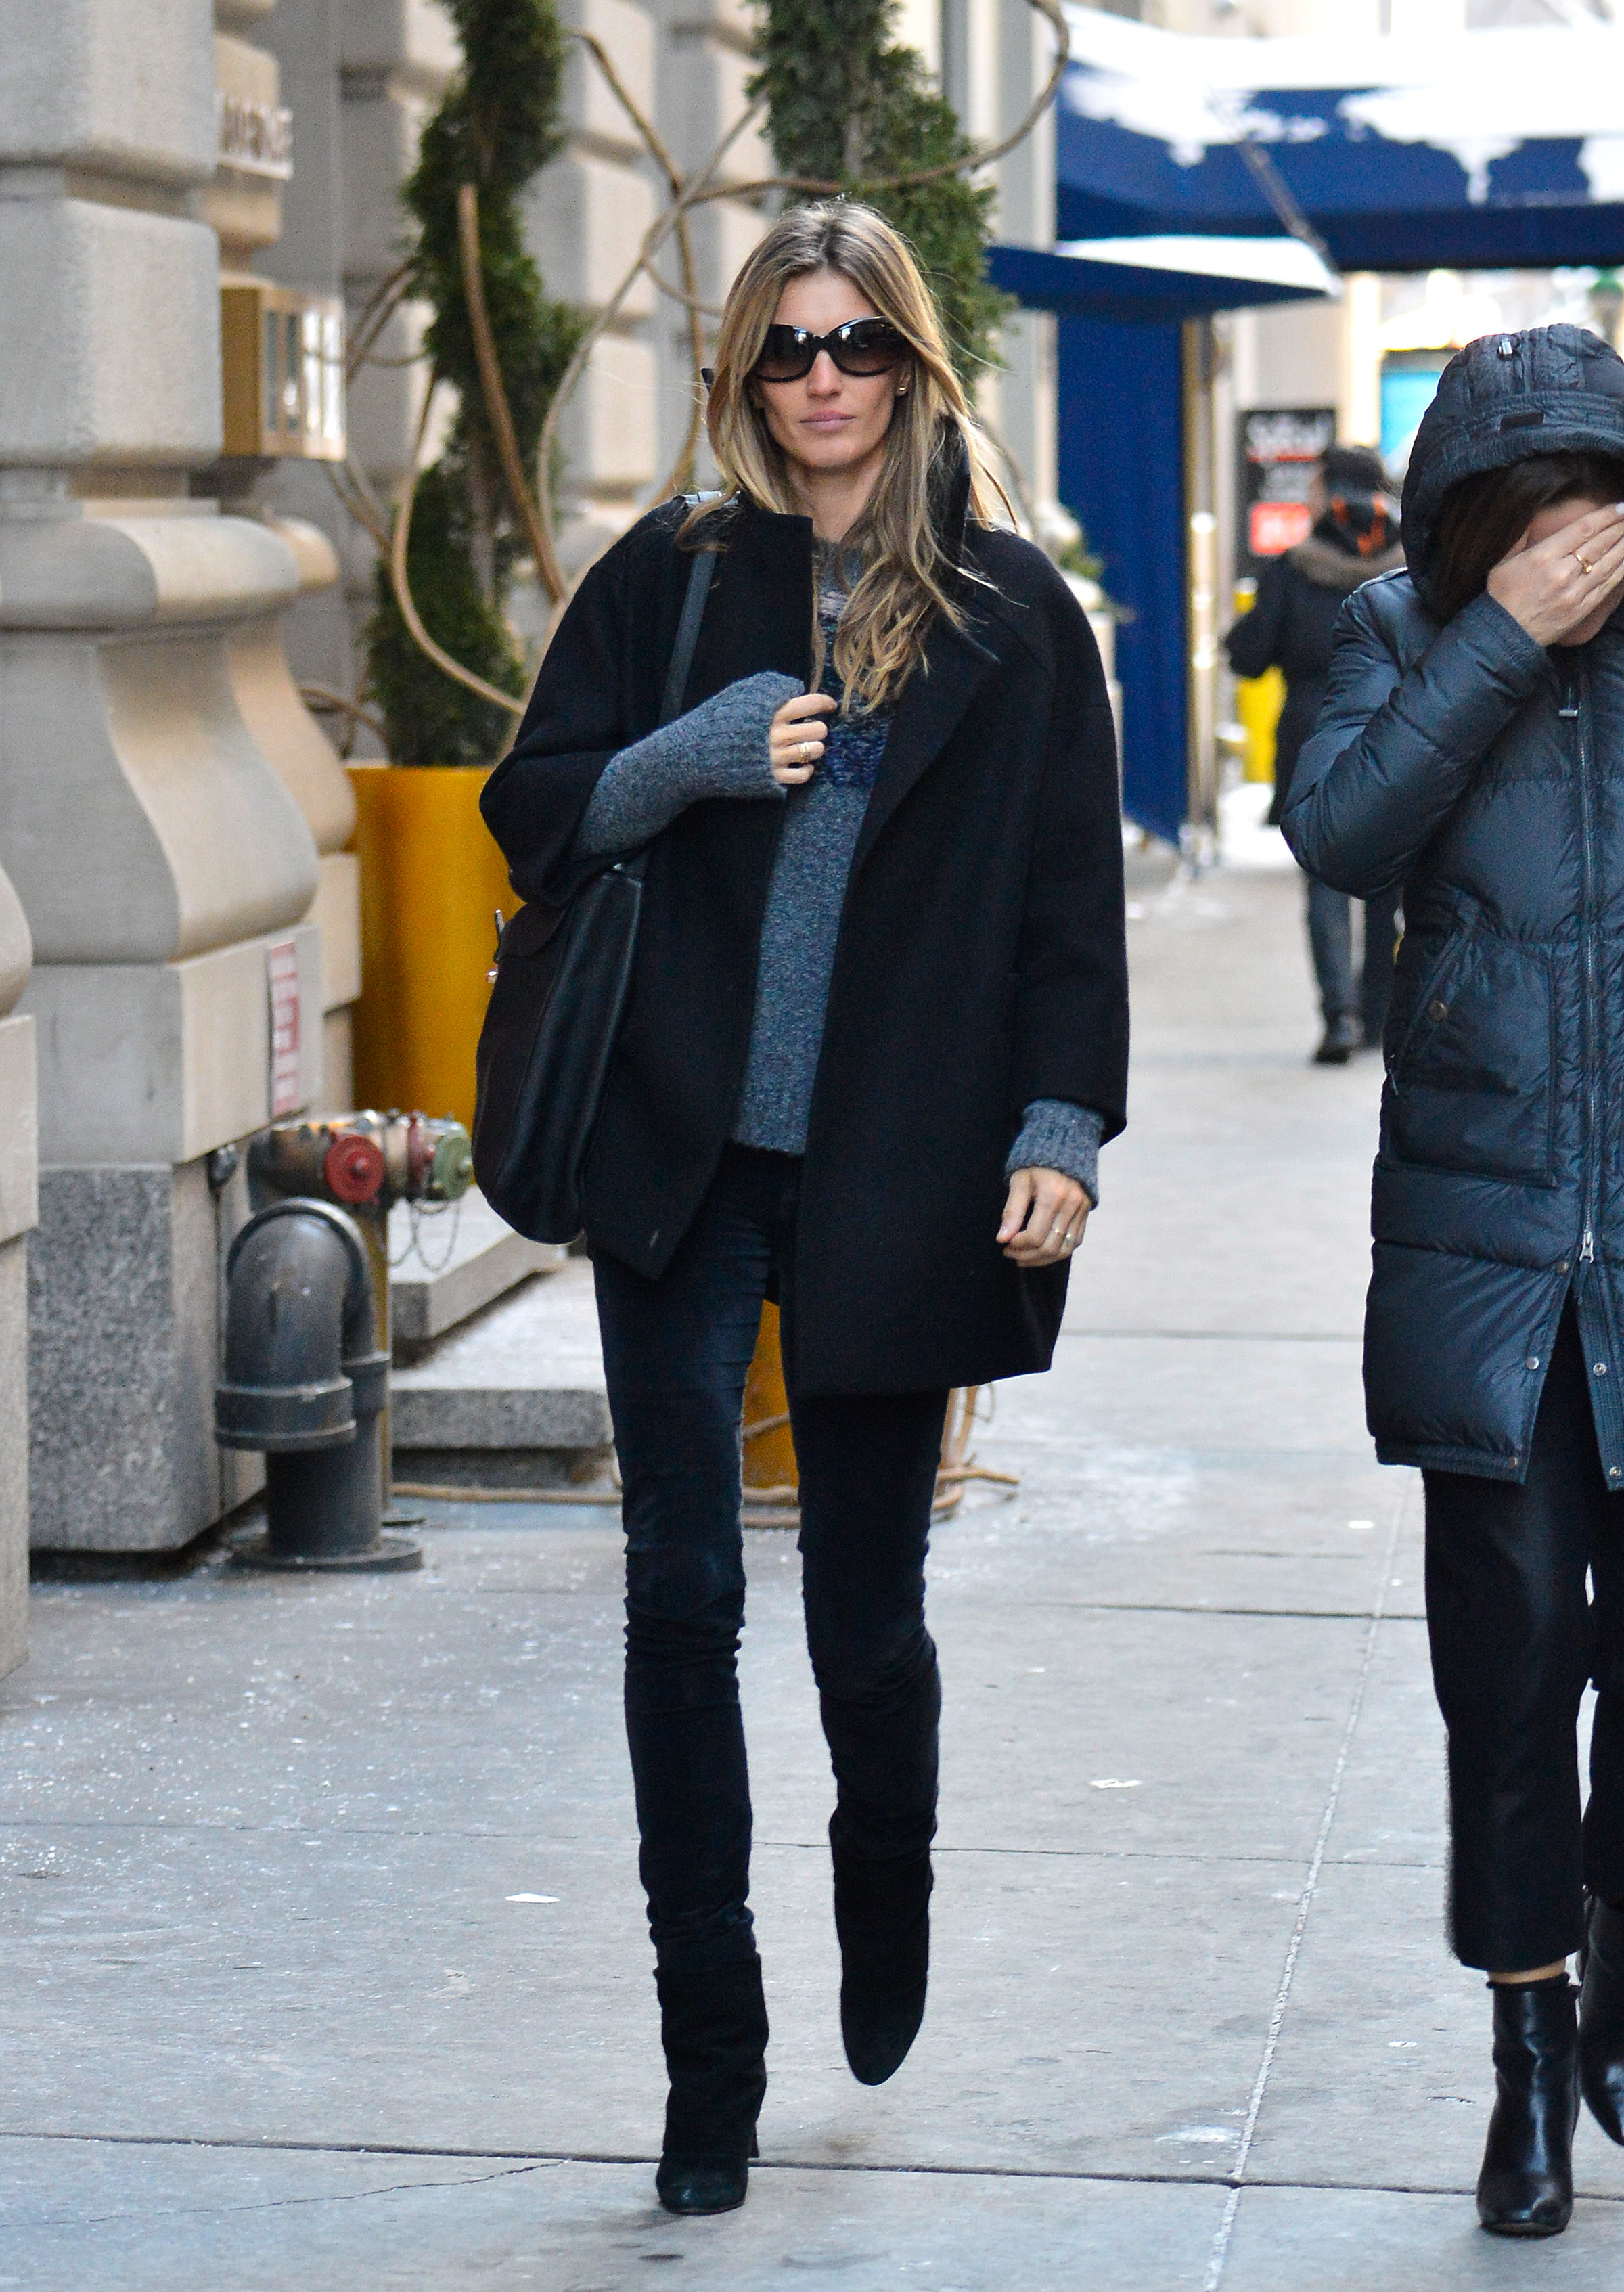 NEW YORK, NY - FEBRUARY 10: Gisele Bundchen is seen on February 10, 2014 in New York City. (Photo by Gardiner Anderson/Bauer-Griffin/GC Images)